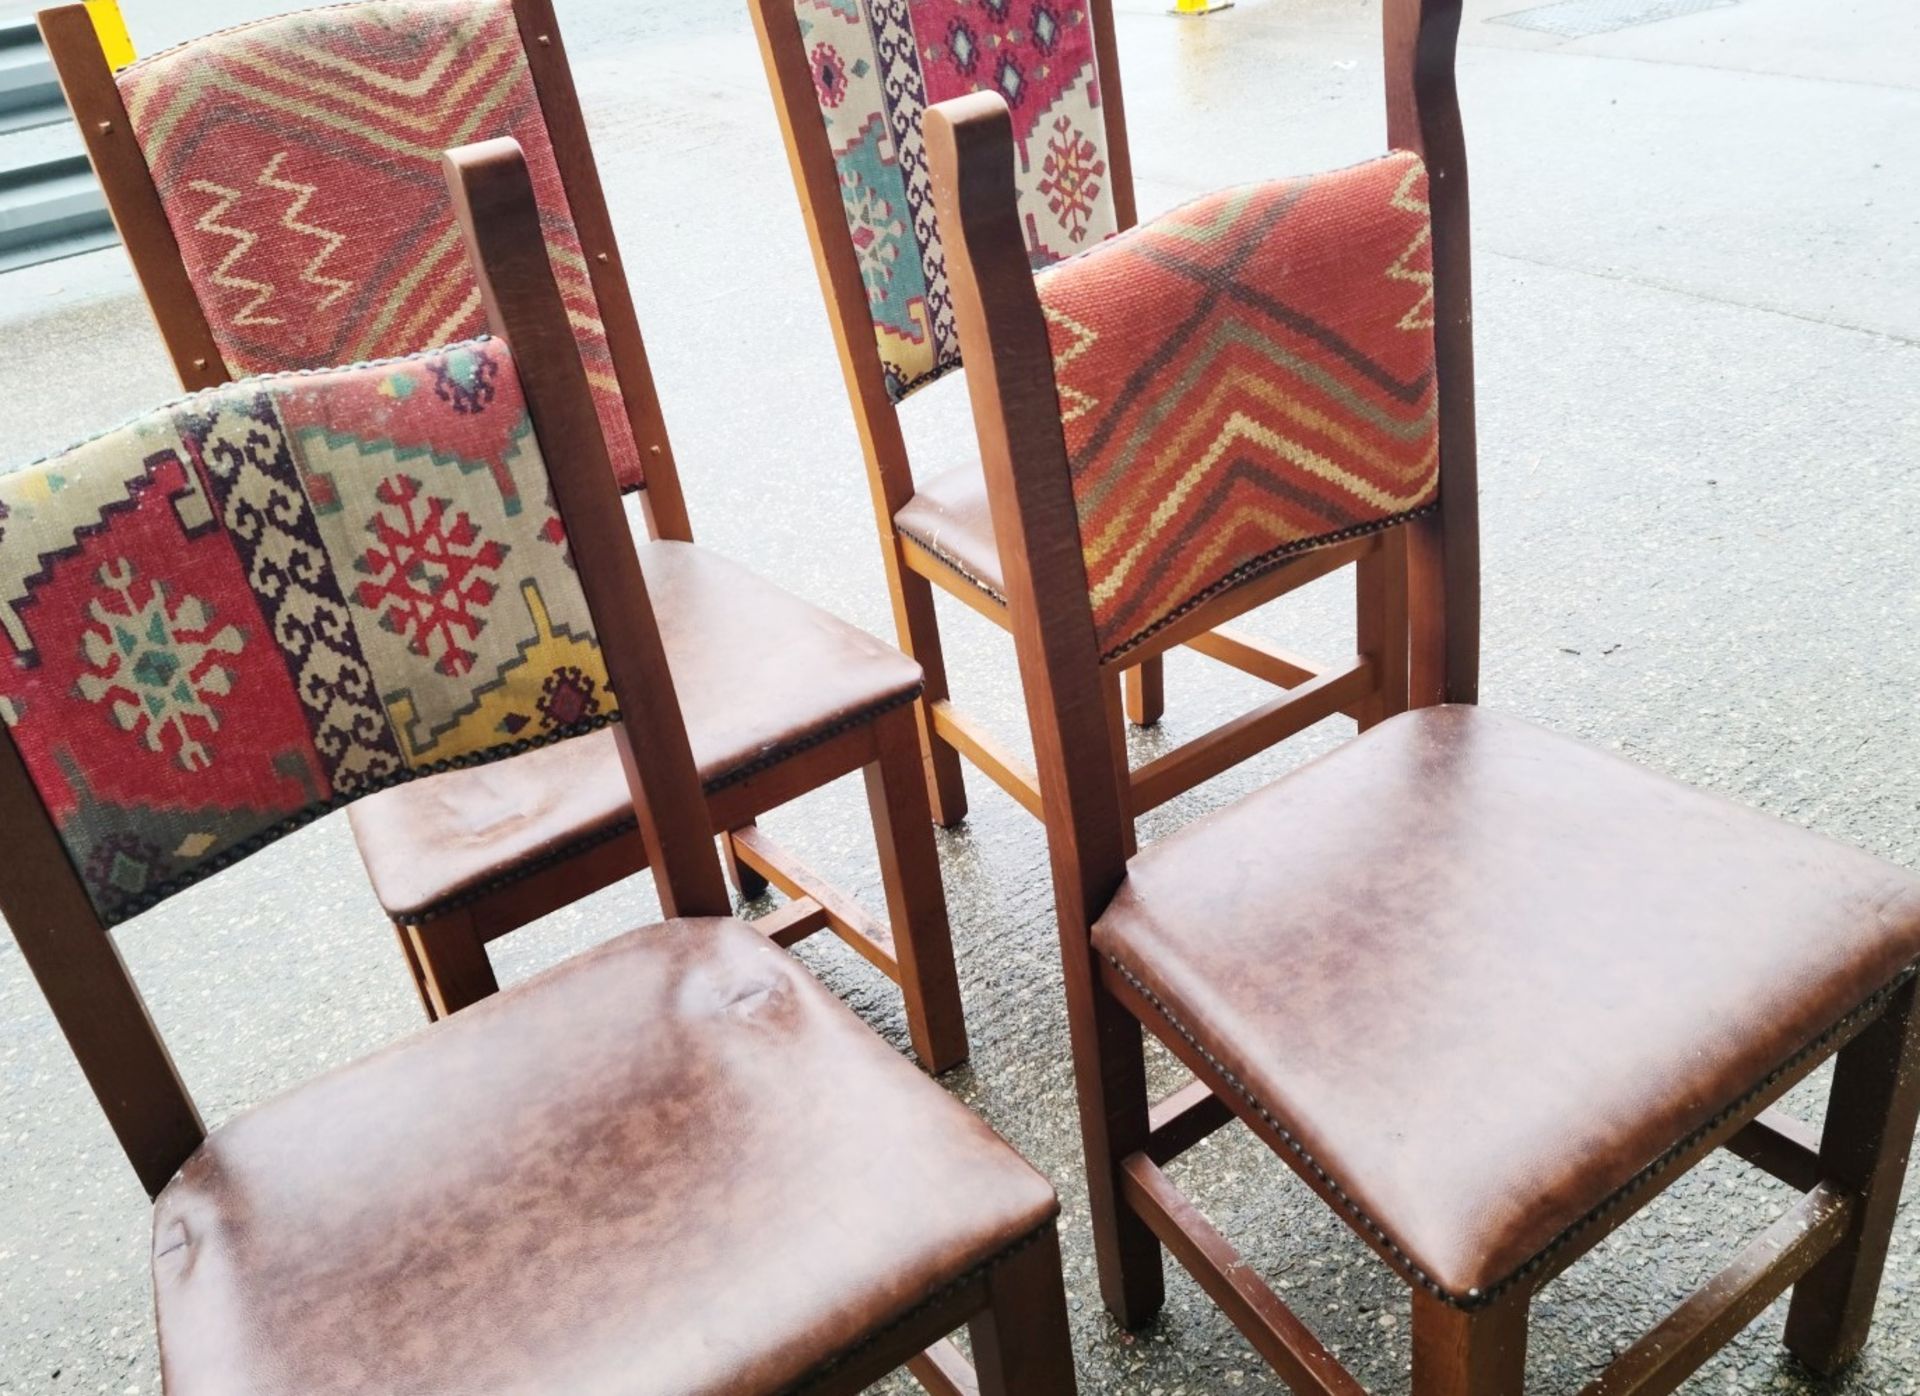 Set Of 5 x Aztec Print Dining Chairs With Faux Brown Leather Seating & Studded Seams - Image 5 of 5